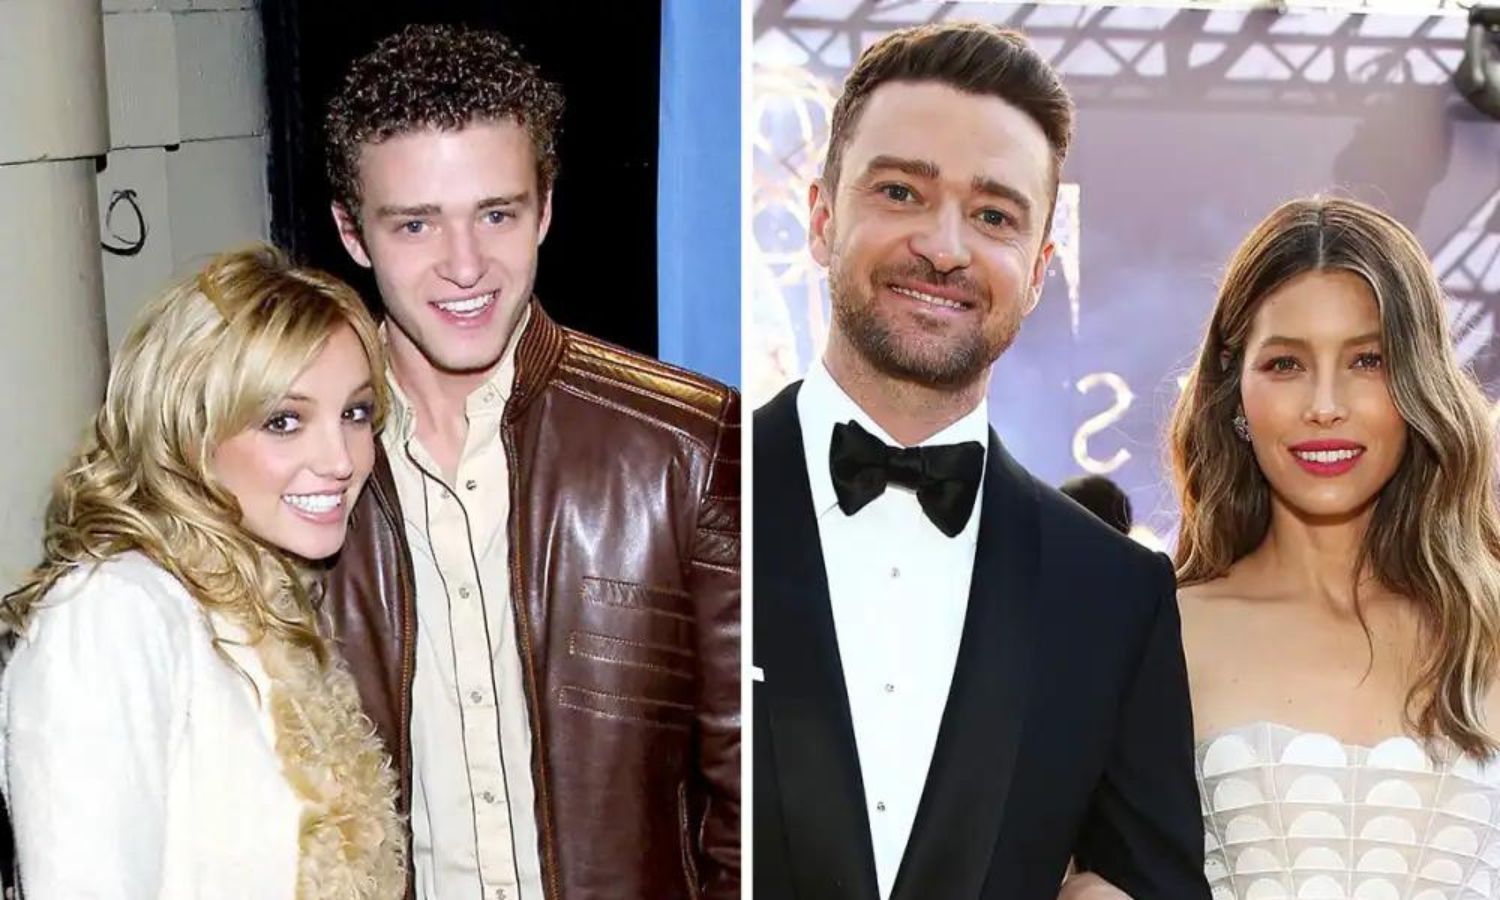 The Truth About Jessica Biel and Justin Timberlake's Enduring Love